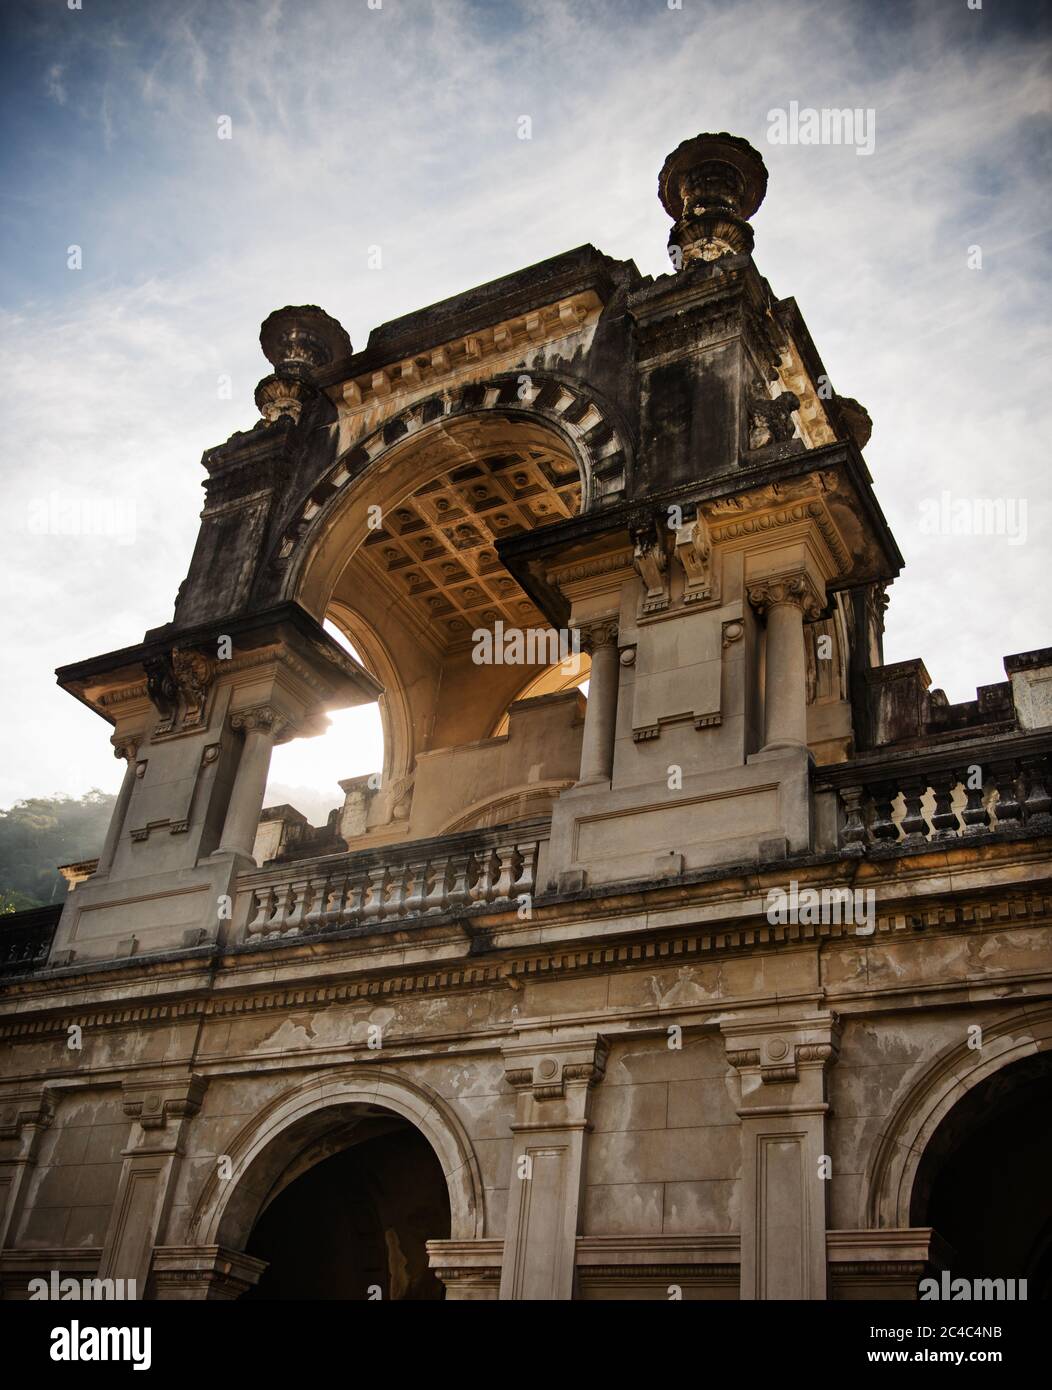 Architectural detail of the atrium of Parque Lage, a public park in the city of Rio de Janeiro, located in the Jardim Botânico neighborhood at the foo Stock Photo